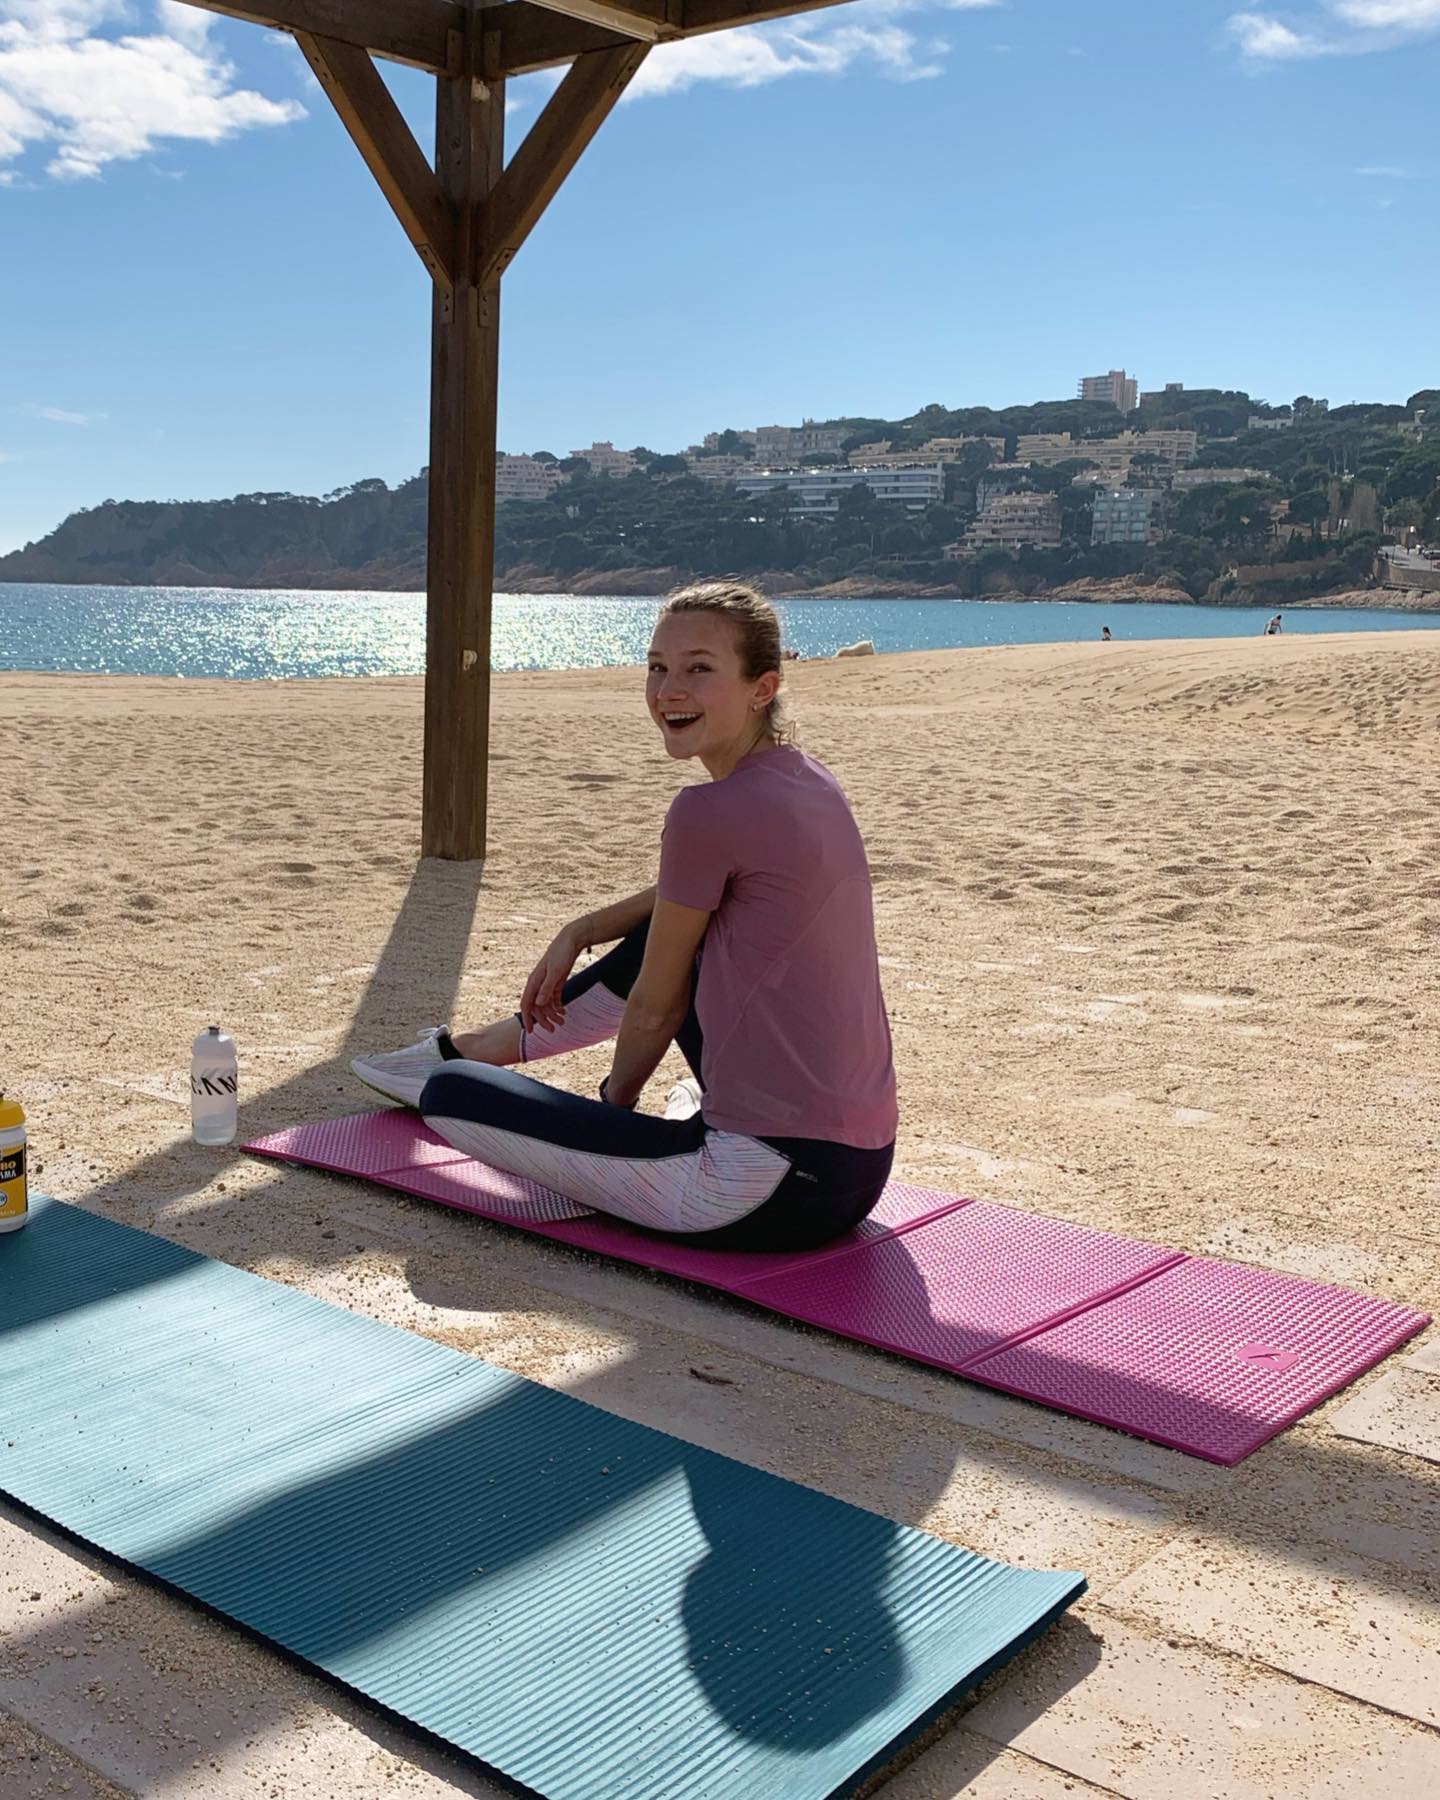 A woman in PUMA yoga clothes is sitting on a yoga mat on the beach